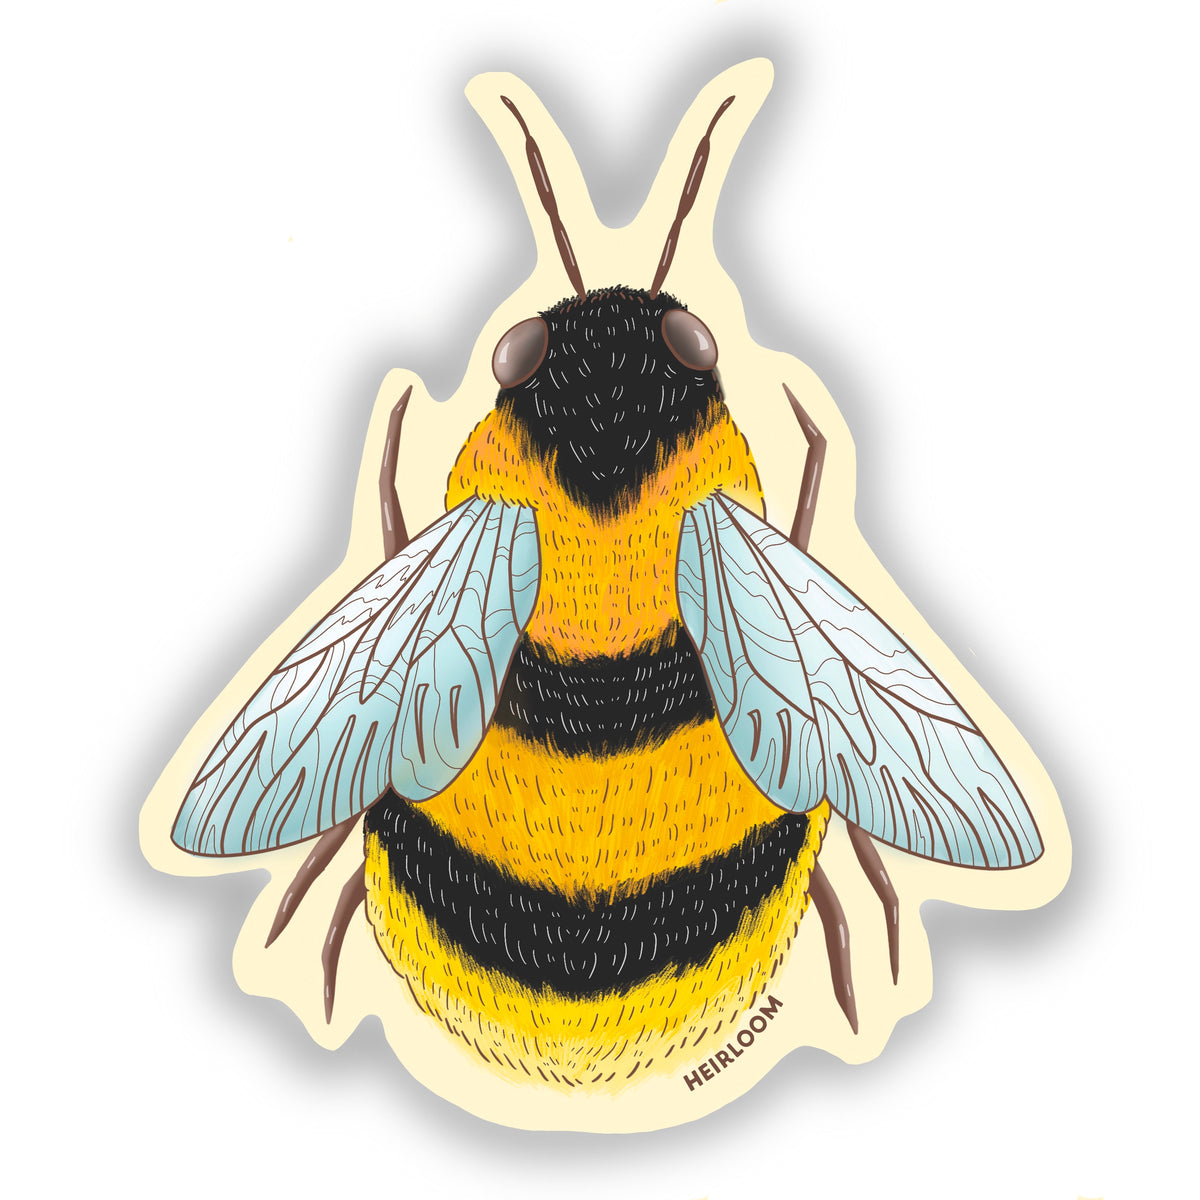 A black and yellow fluffy bumble bee with light blue wings on a light yellow background. The view is from over top of the bee.